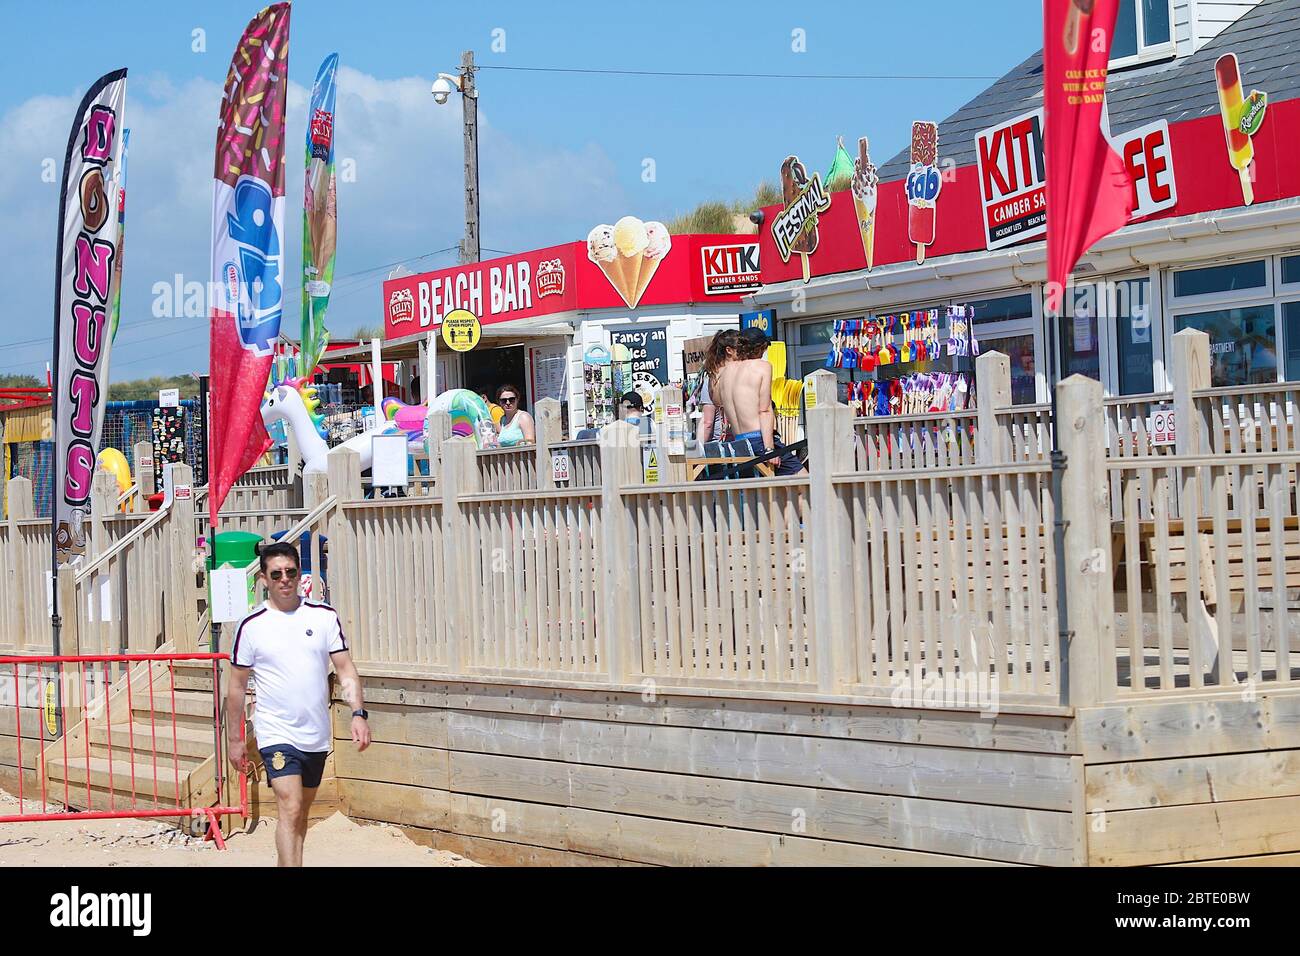 Camber, East Sussex, UK. 25 May, 2020. UK Weather:  Camber Sands, East Sussex. Social distancing sign at the beach bar with people waiting patiently in the queue. Photo Credit: Paul Lawrenson/Alamy Live News Stock Photo